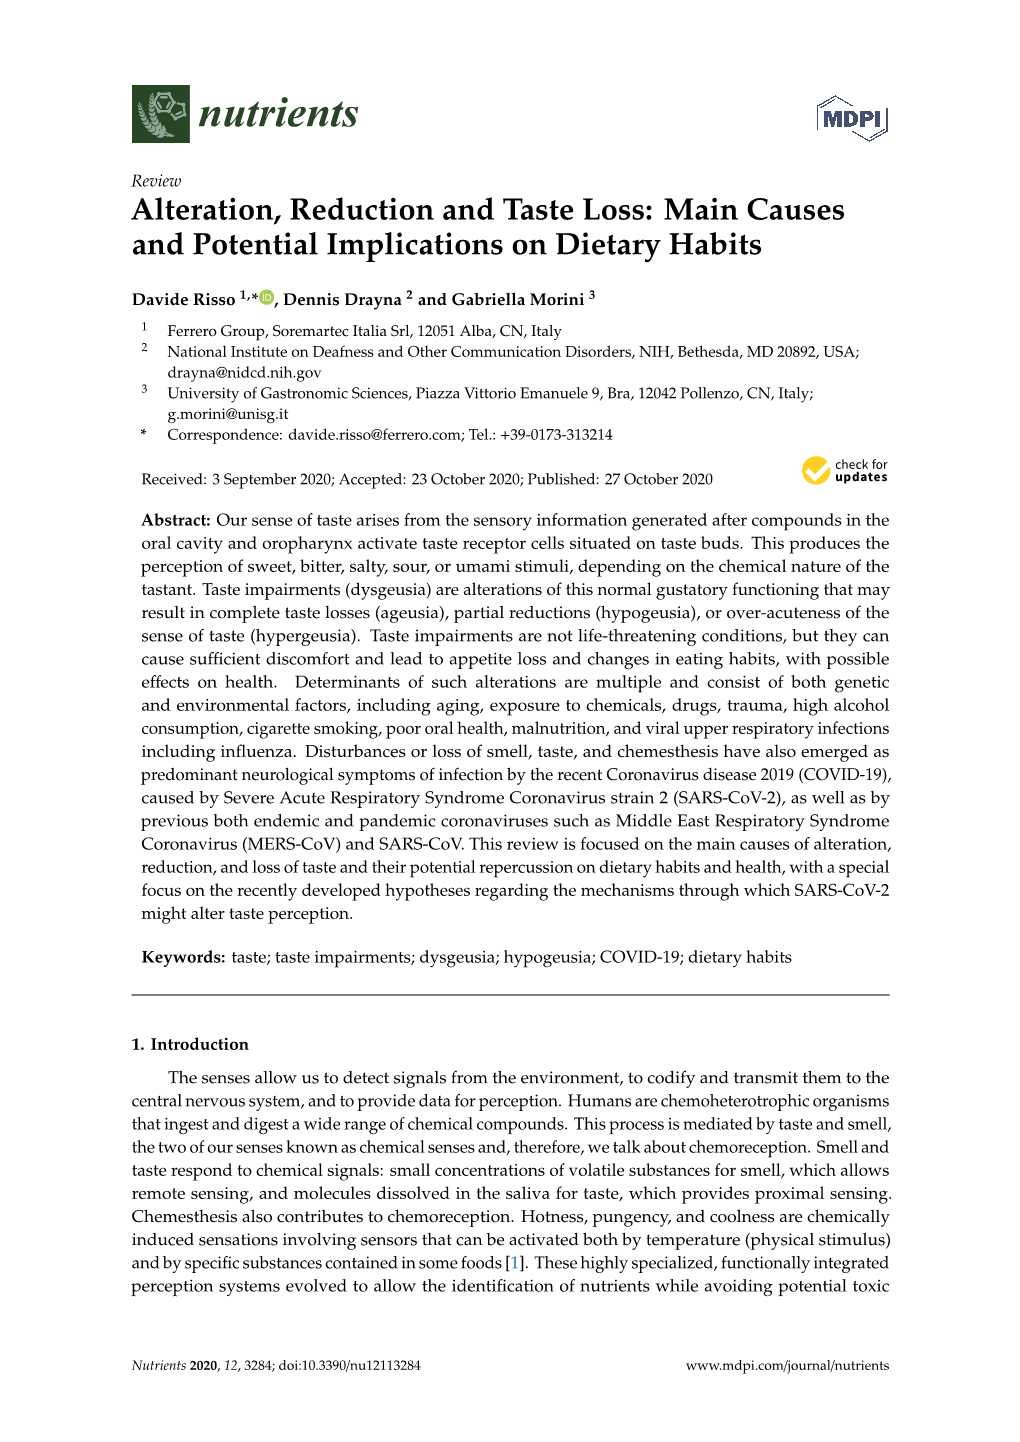 Alteration, Reduction and Taste Loss: Main Causes and Potential Implications on Dietary Habits